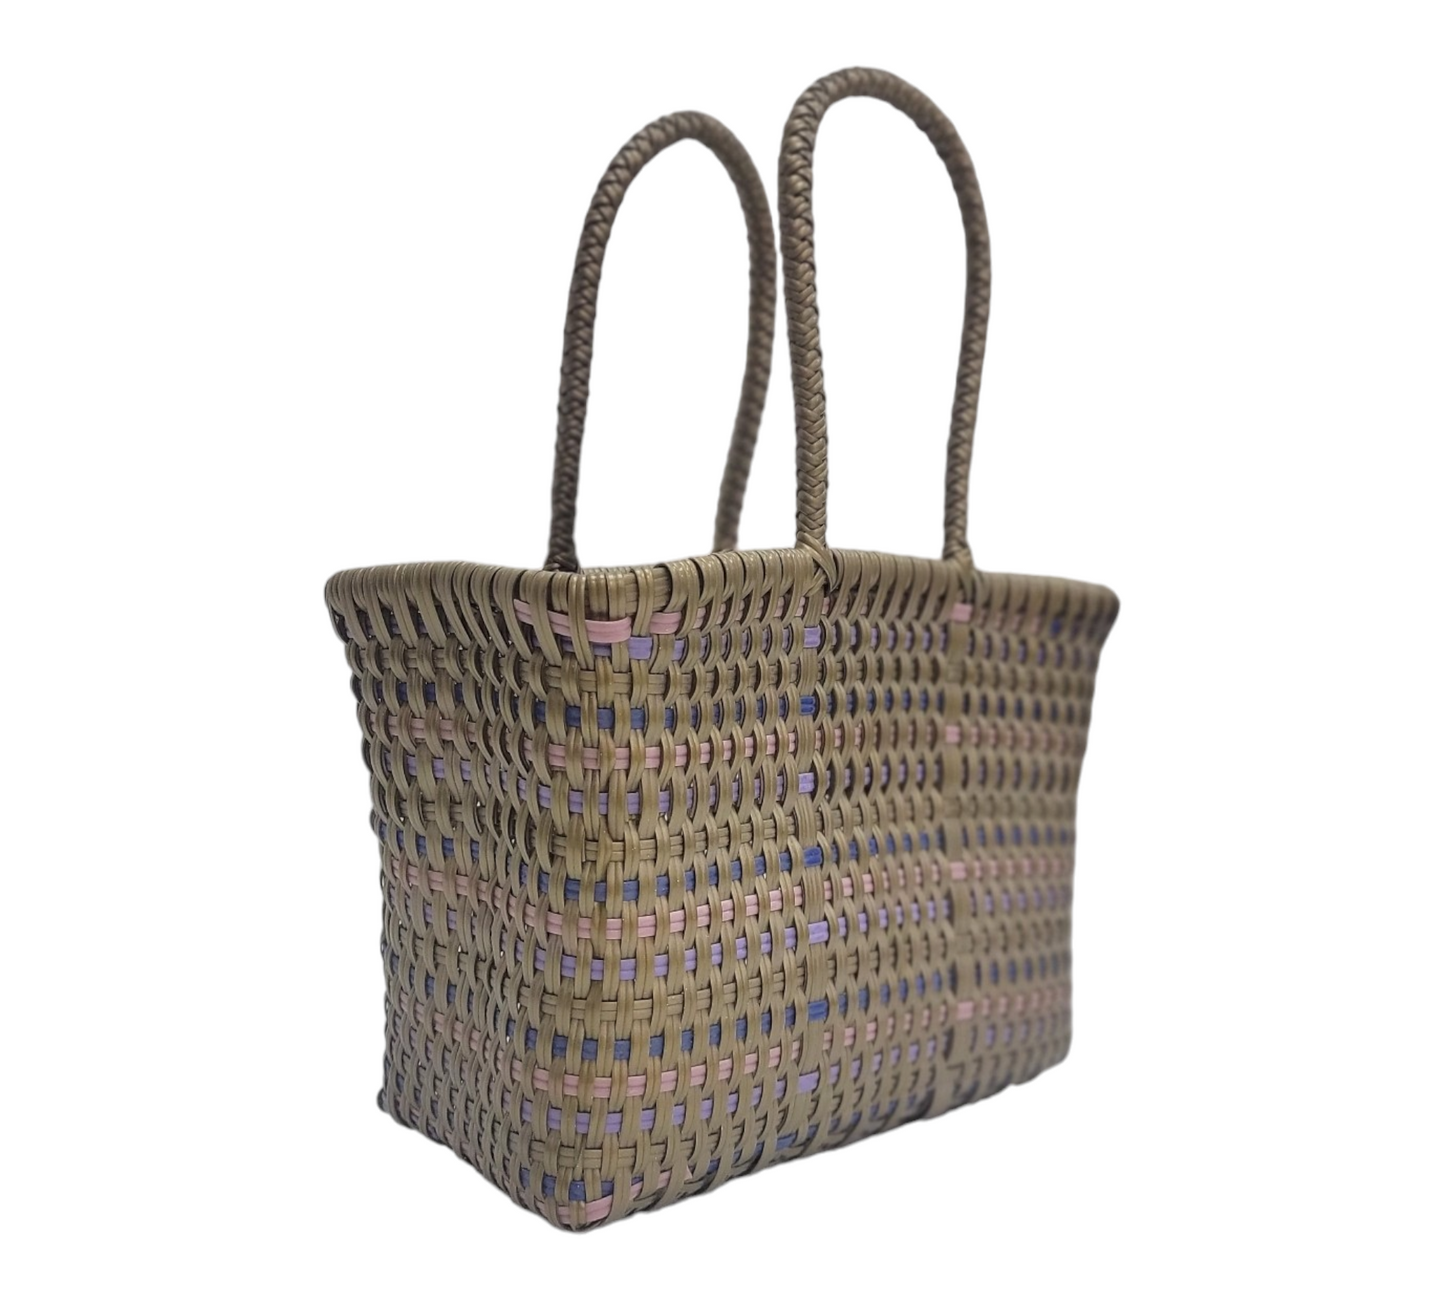 Girly Gold Mini Tote | Handwoven recycled bags